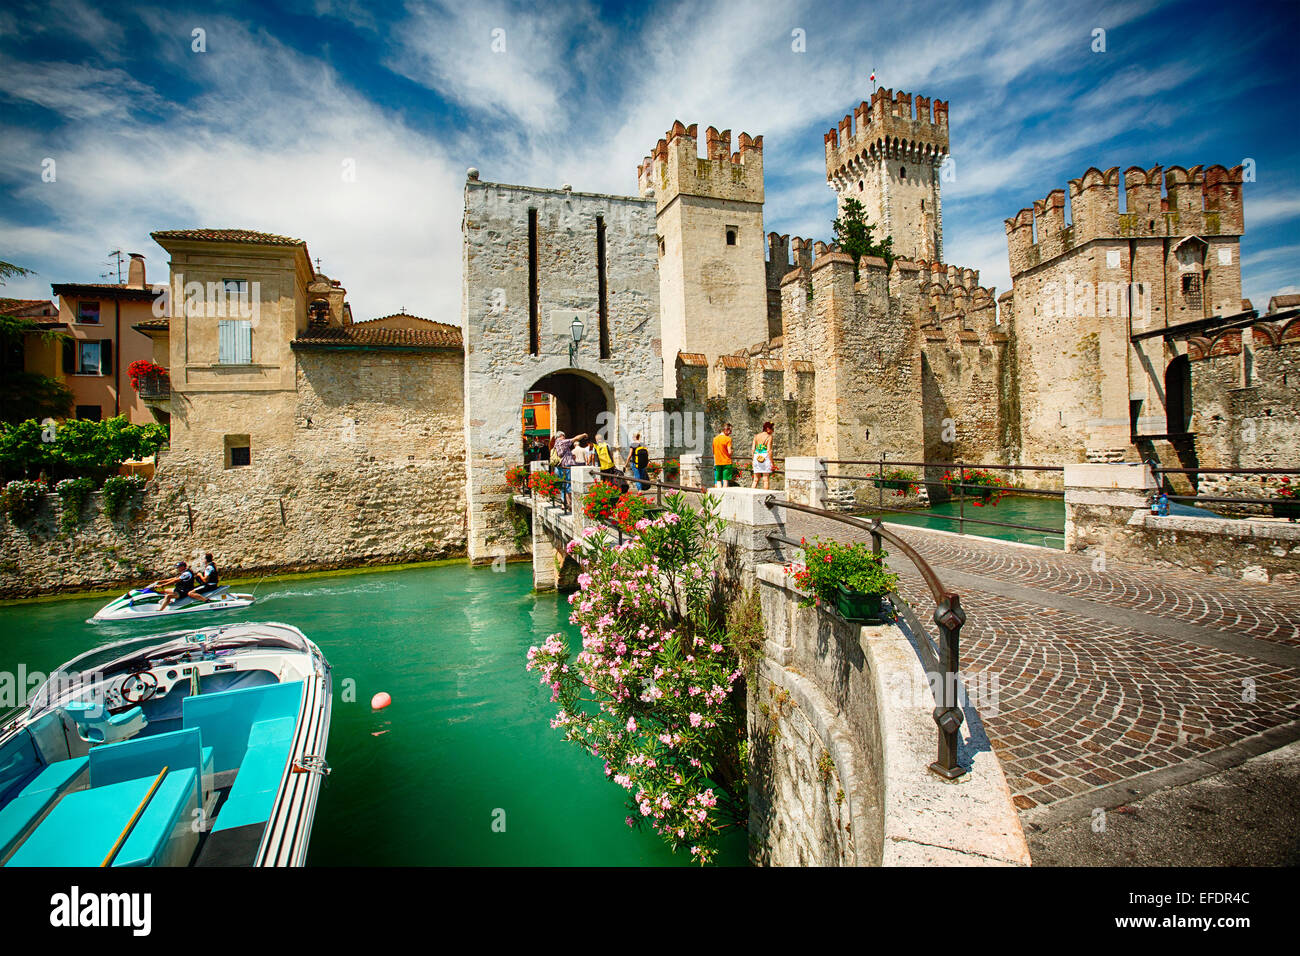 View of a Castle in the Lake, Scaliger Castle, Sirmione, Lake Garda, Lombardy, Italy Stock Photo